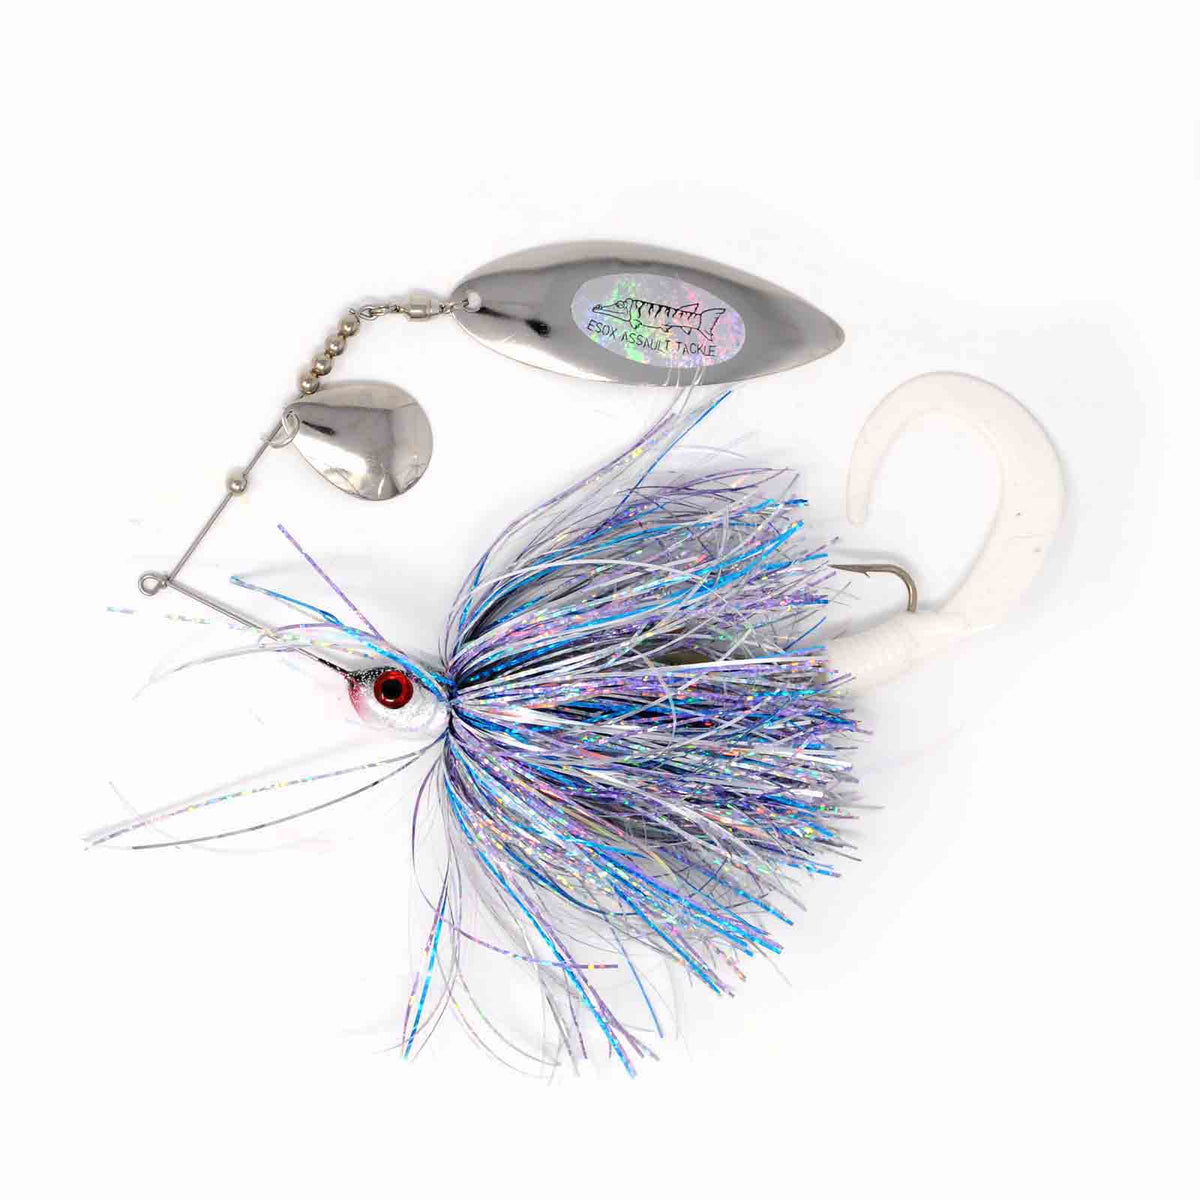 View of Spinnerbaits Esox Assault Spinnerbait Willow 1oz Shimmer Shad available at EZOKO Pike and Musky Shop